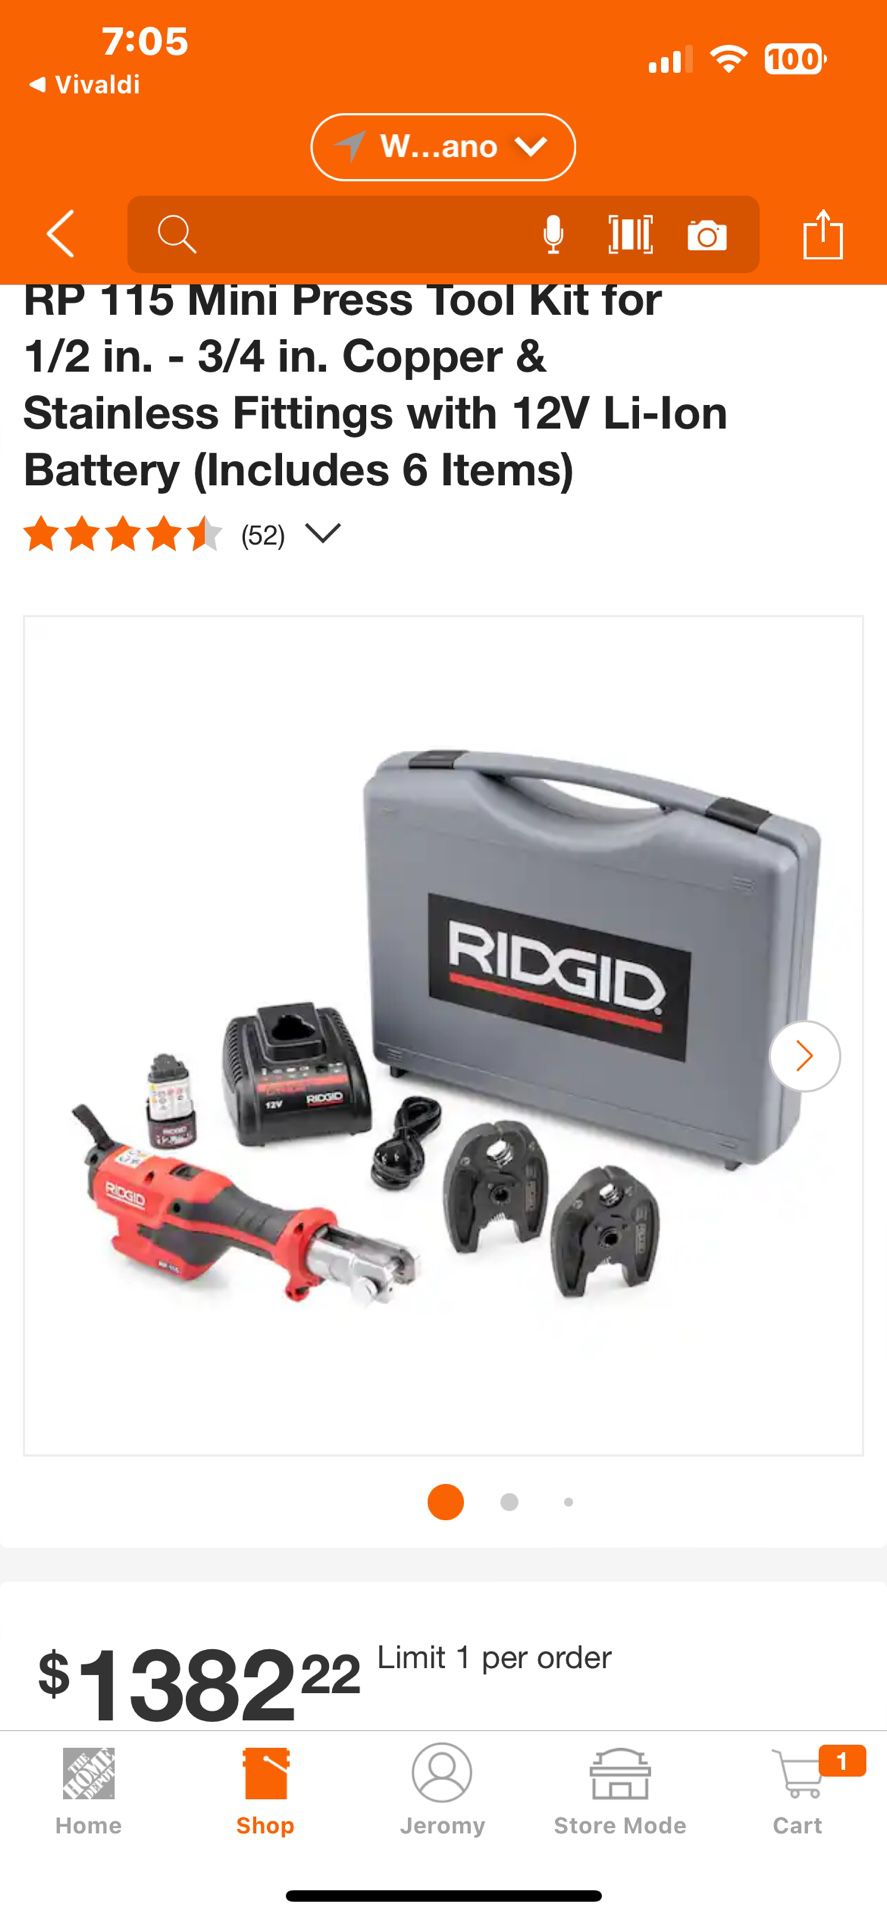 Ridgid Pro Press Mini Including 1/2” and 3/4” head + Batteries & charger